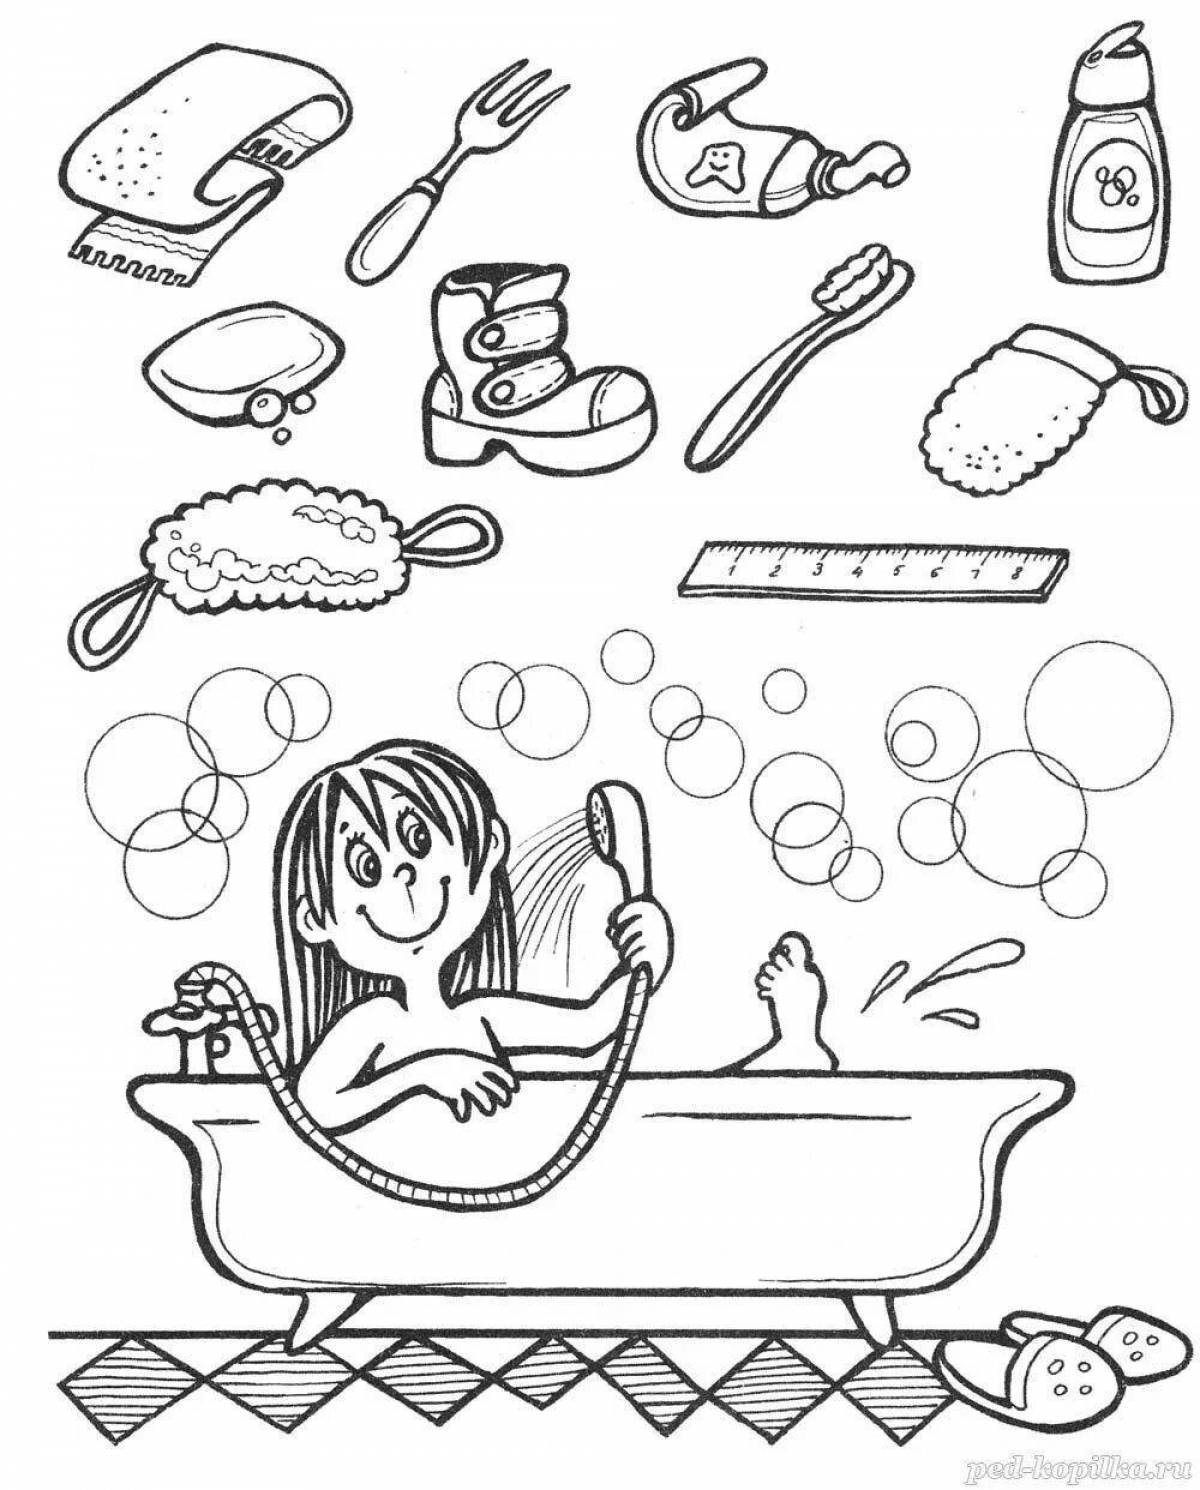 Color-focused personal care coloring book